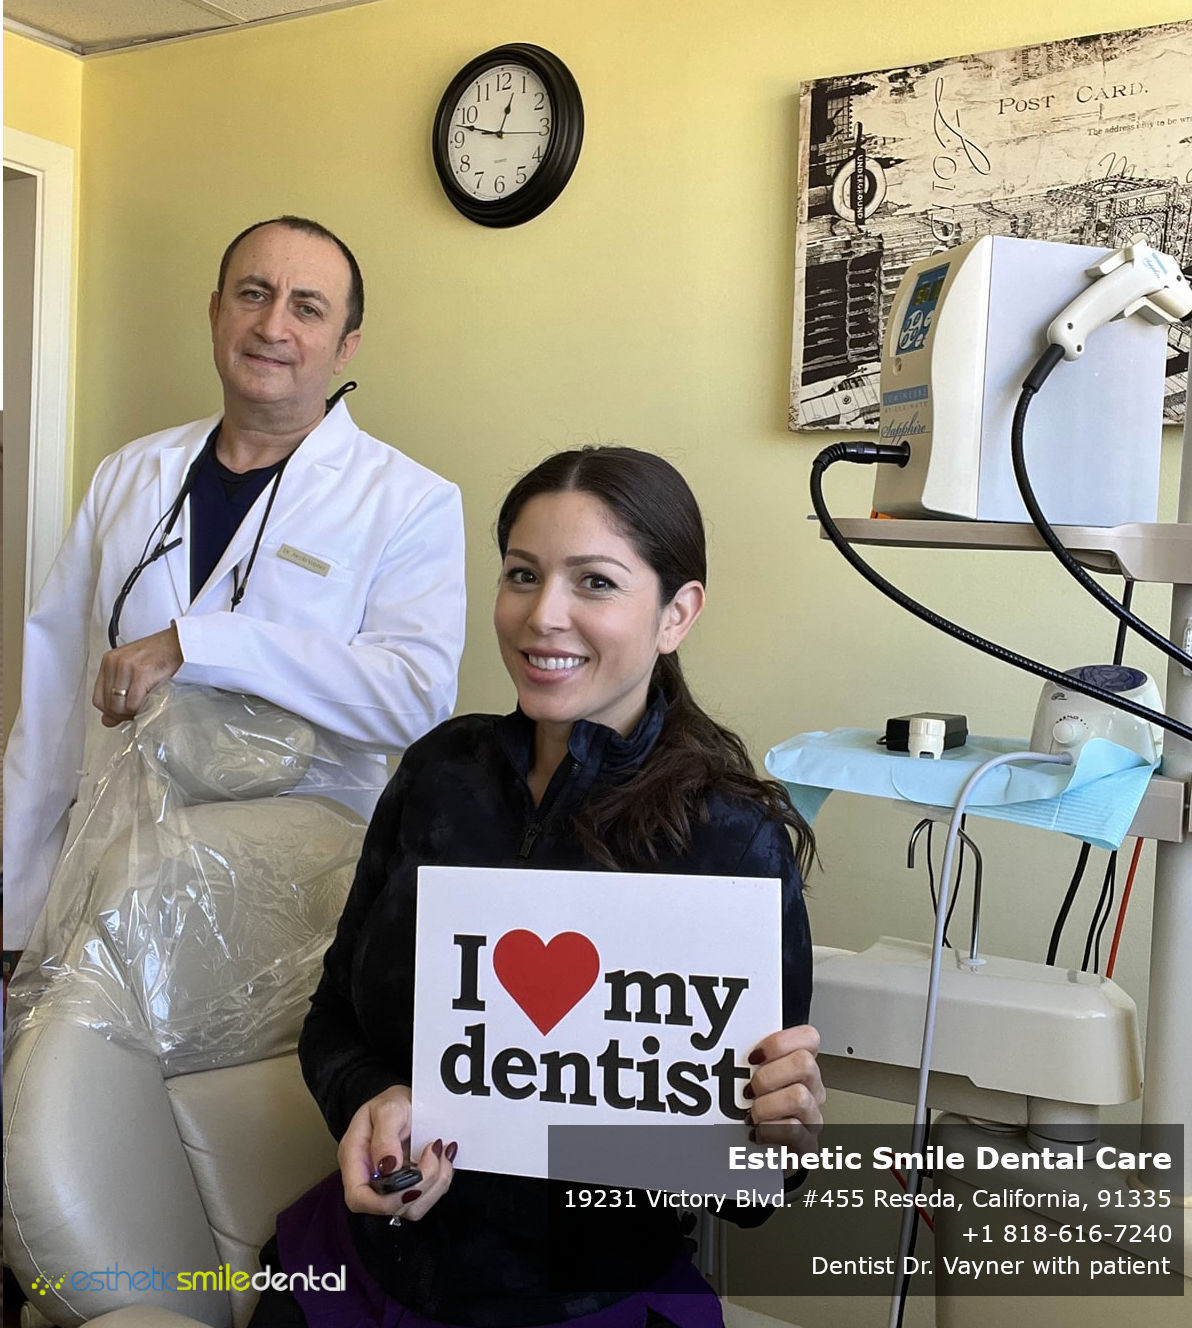 Dentist at Esthetic Smile Dental Care in Winnetka, CA Reveals Specialized Services for Advanced Dental Care